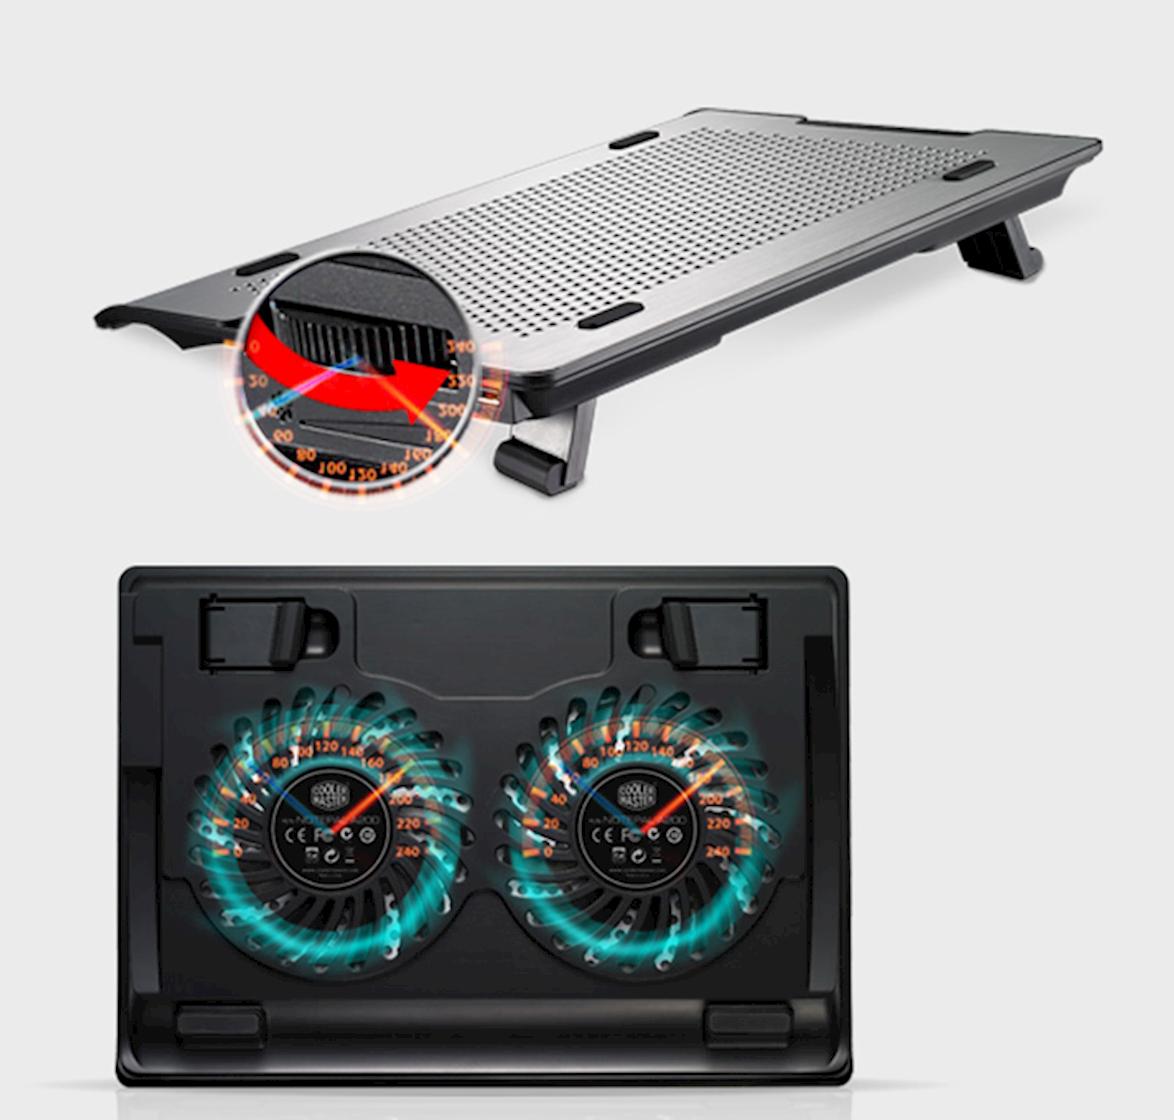 Dual 140mm Fans With Fan Speed Controller